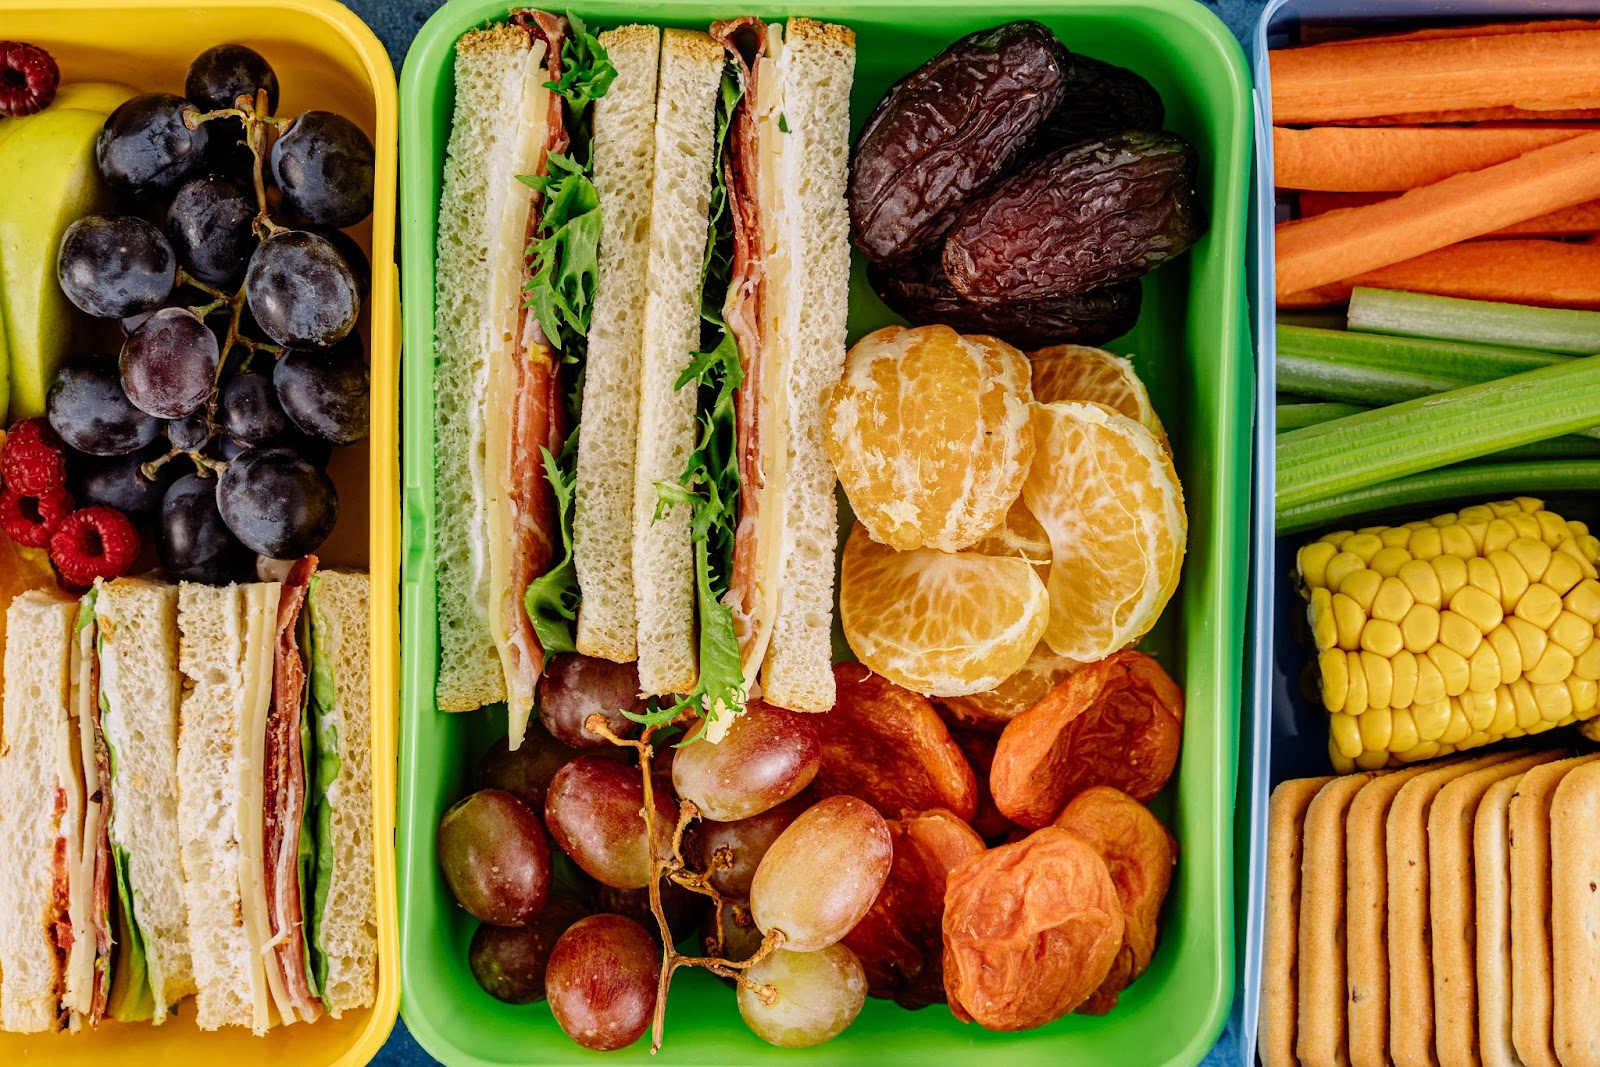 A sandwich in a packed lunch box with orange segments, grapes and dates.